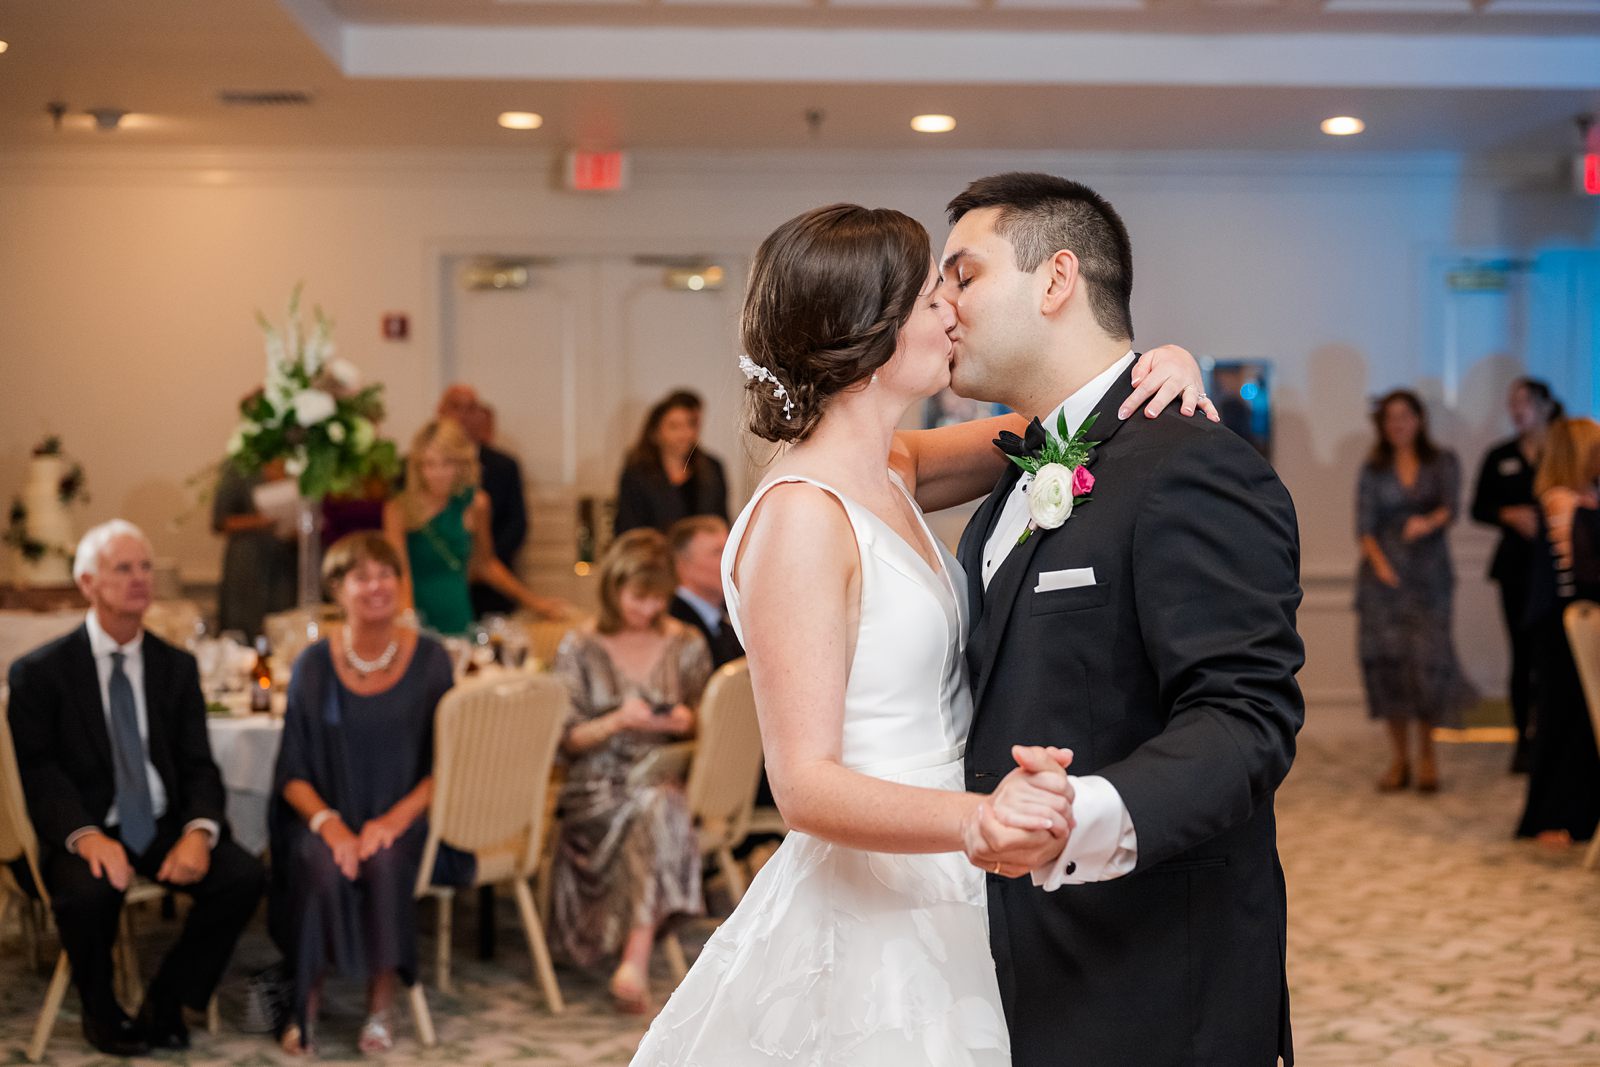 Bride and Groom First Dance at Fall Hermitage Country Club Wedding Reception